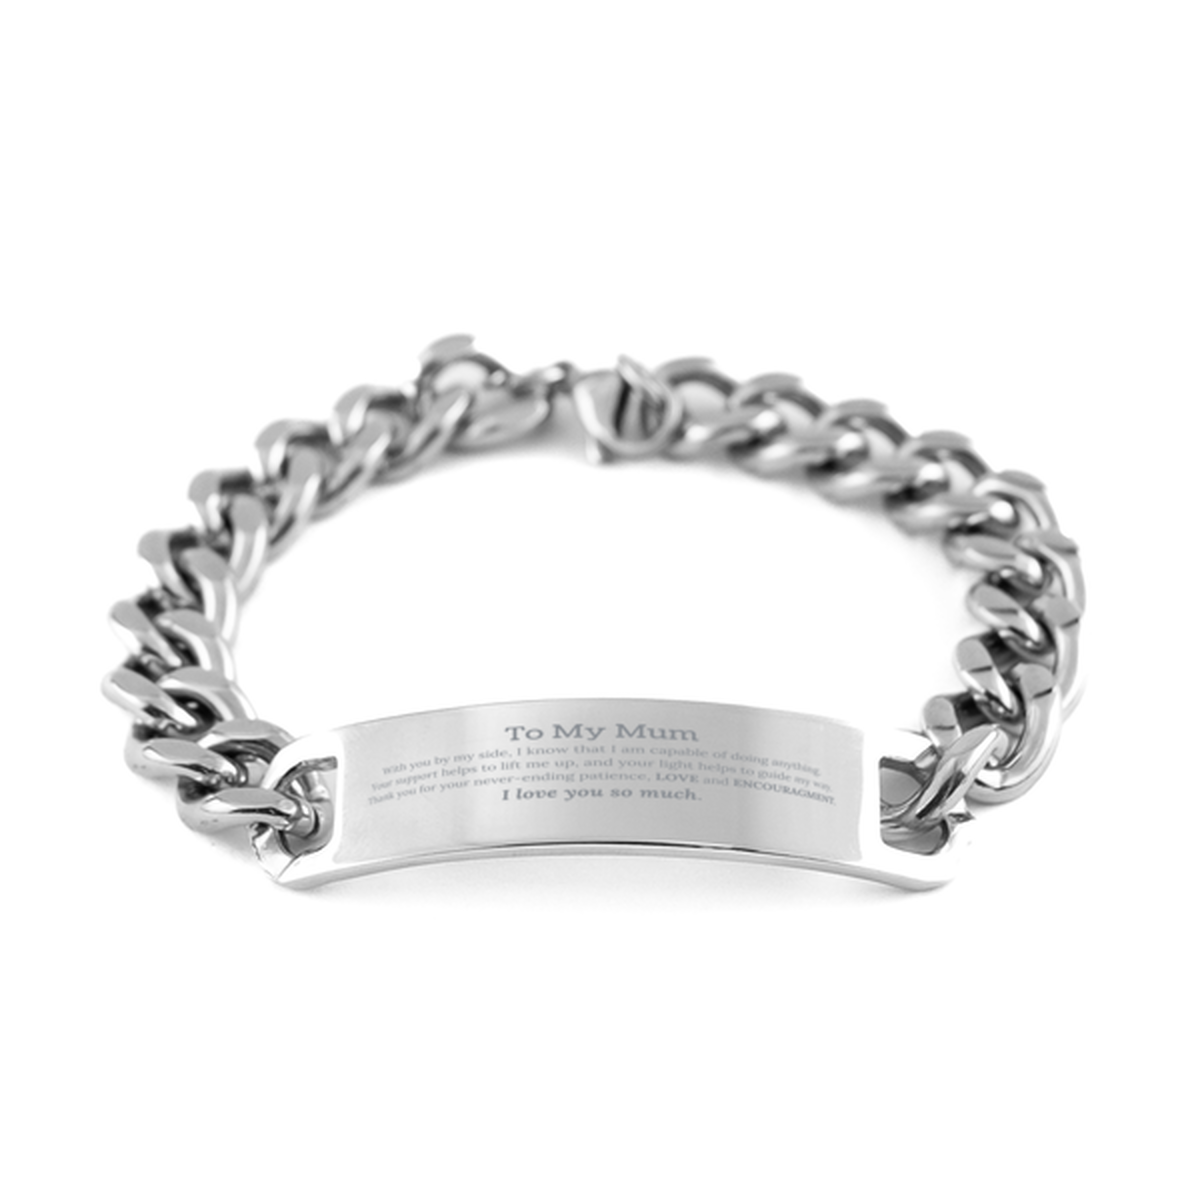 Appreciation Mum Cuban Chain Stainless Steel Bracelet Gifts, To My Mum Birthday Christmas Wedding Keepsake Gifts for Mum With you by my side, I know that I am capable of doing anything. I love you so much